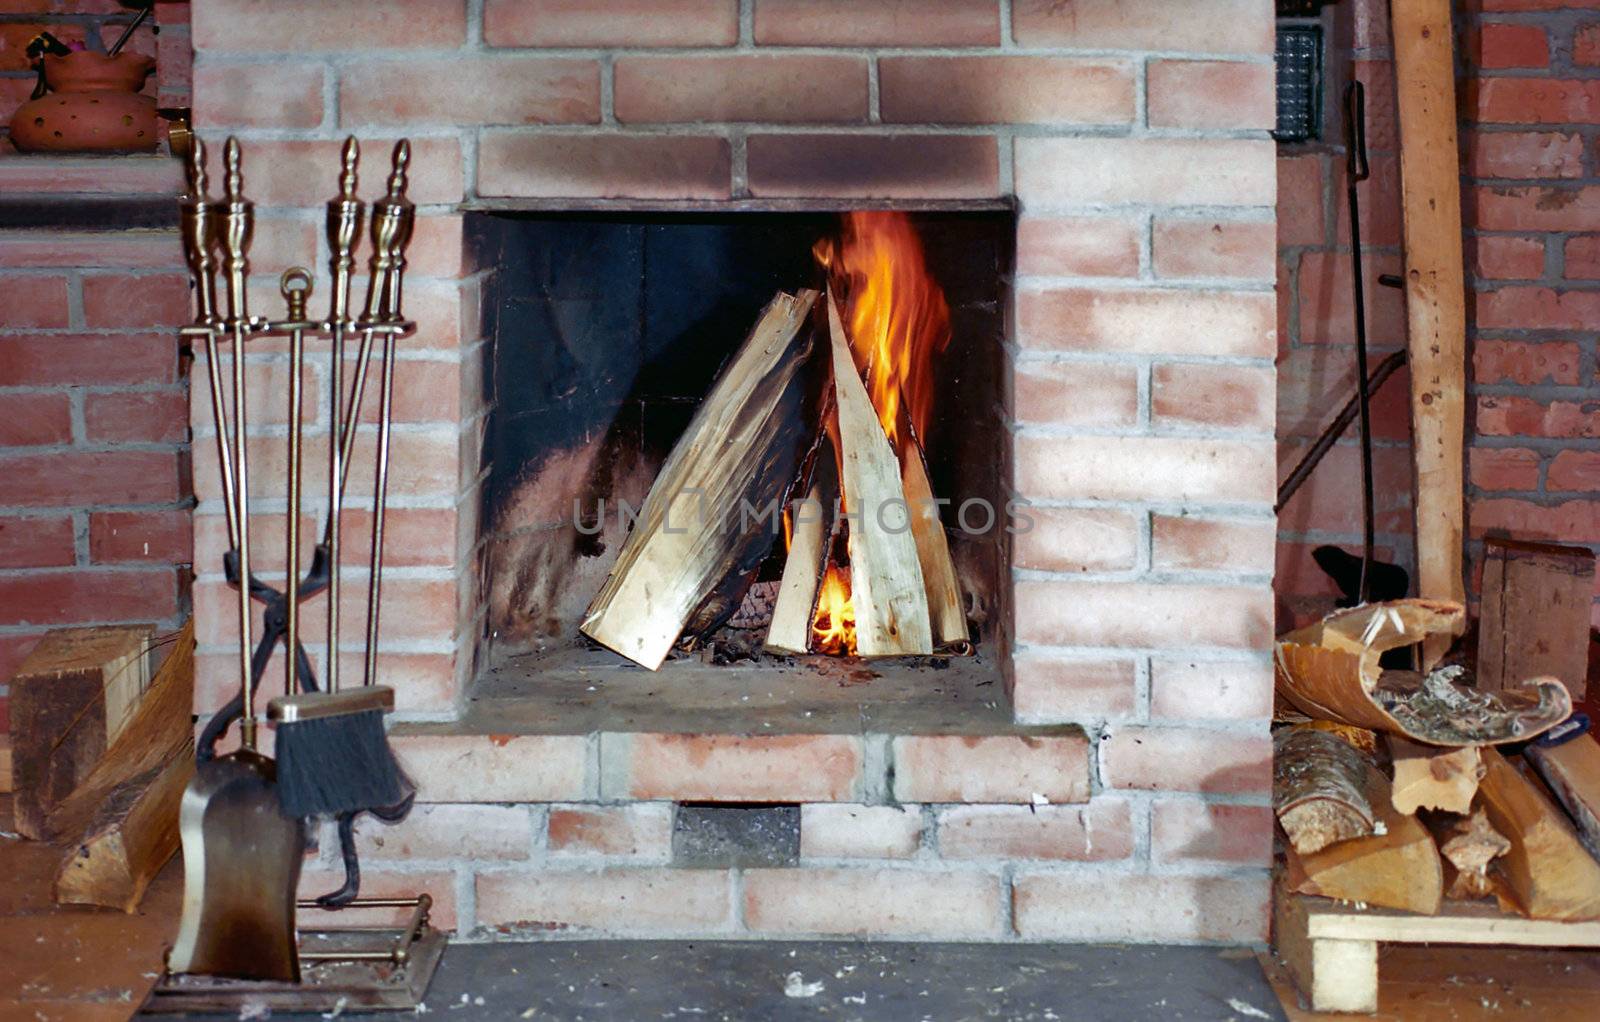 Fireplace with flame and fire irons